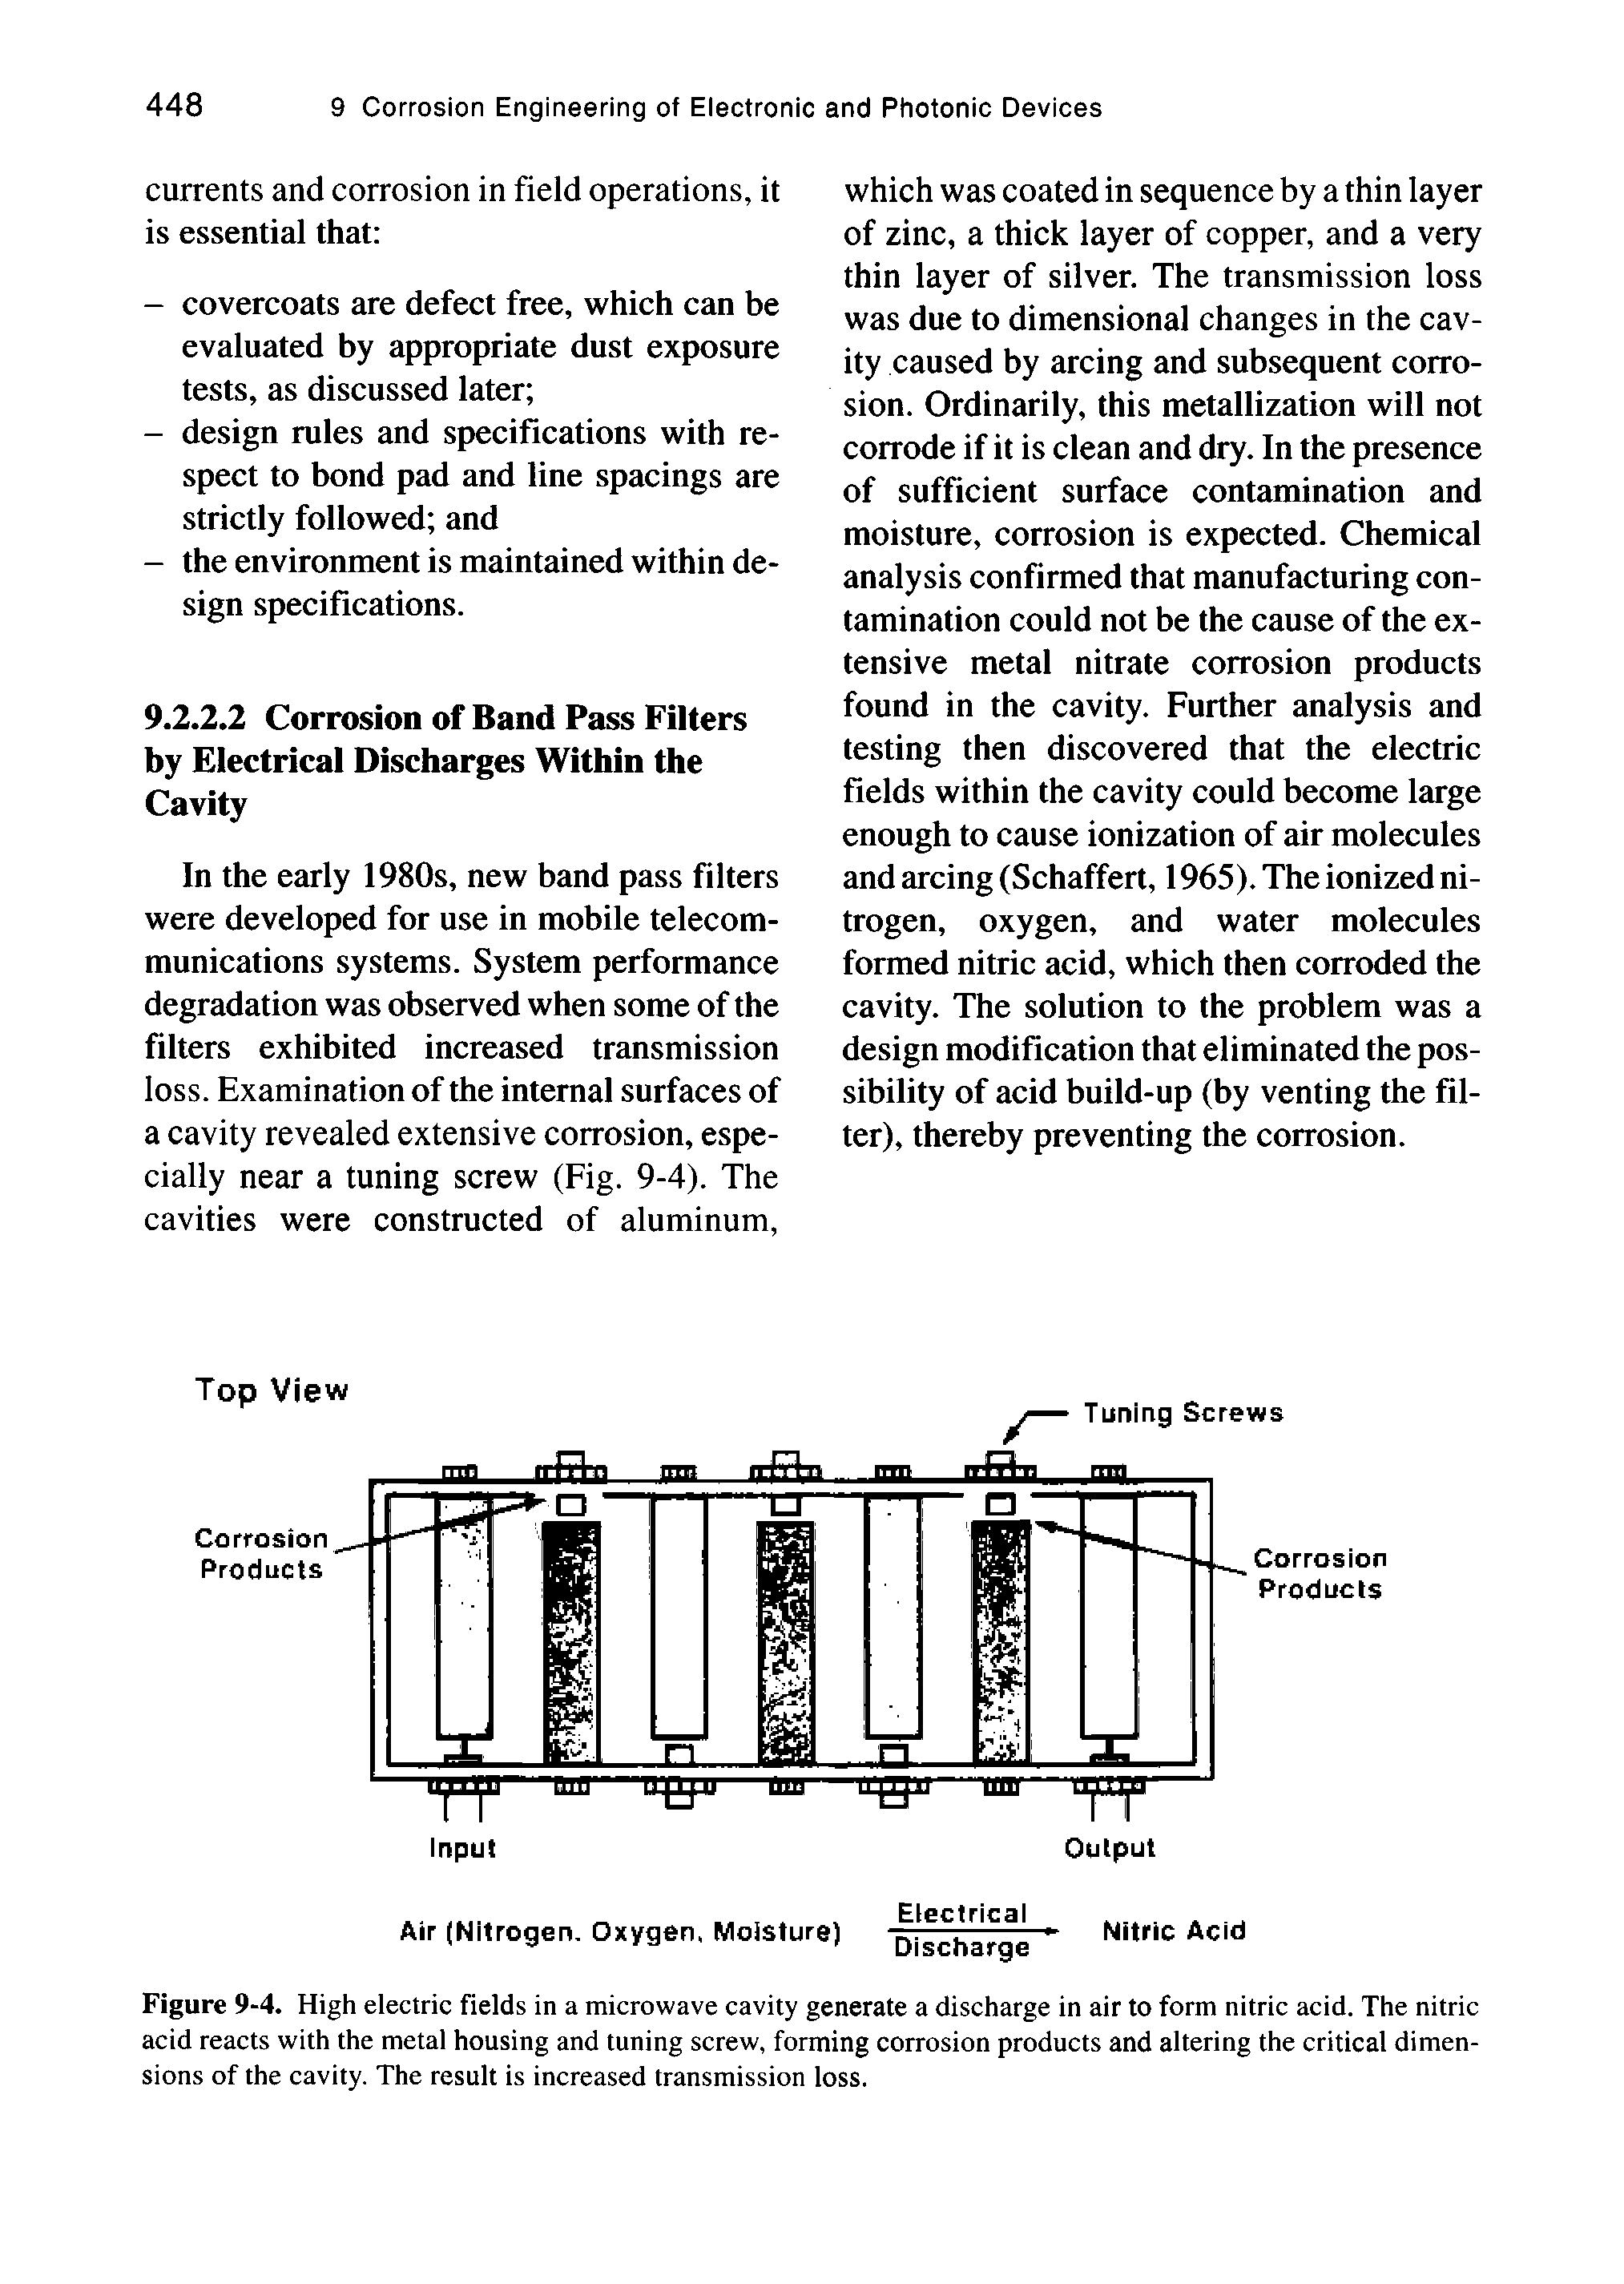 Figure 9-4. High electric fields in a microwave cavity generate a discharge in air to form nitric acid. The nitric acid reacts with the metal housing and tuning screw, forming corrosion products and altering the critical dimensions of the cavity. The result is increased transmission loss.